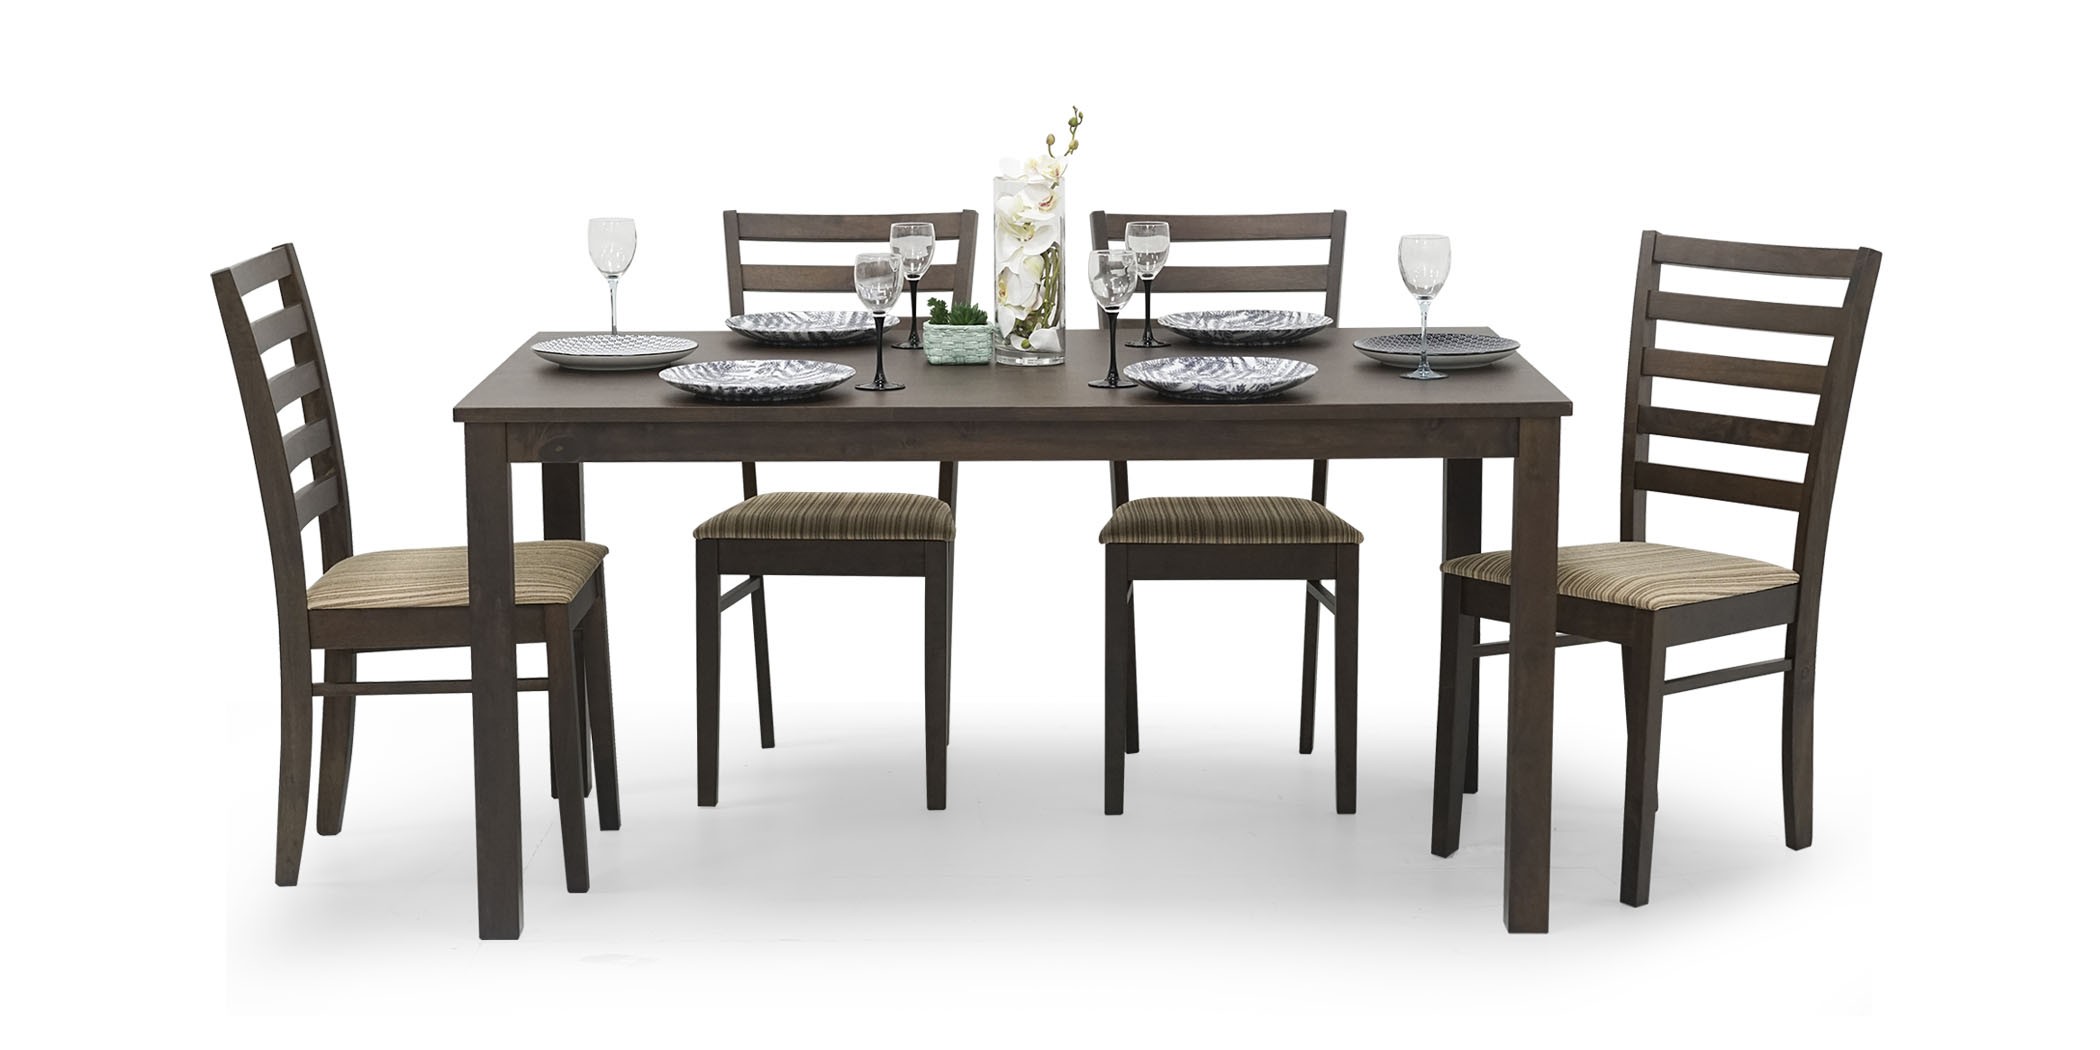 New Ocean Table & 6 chairs Black Cherry Rubberwood